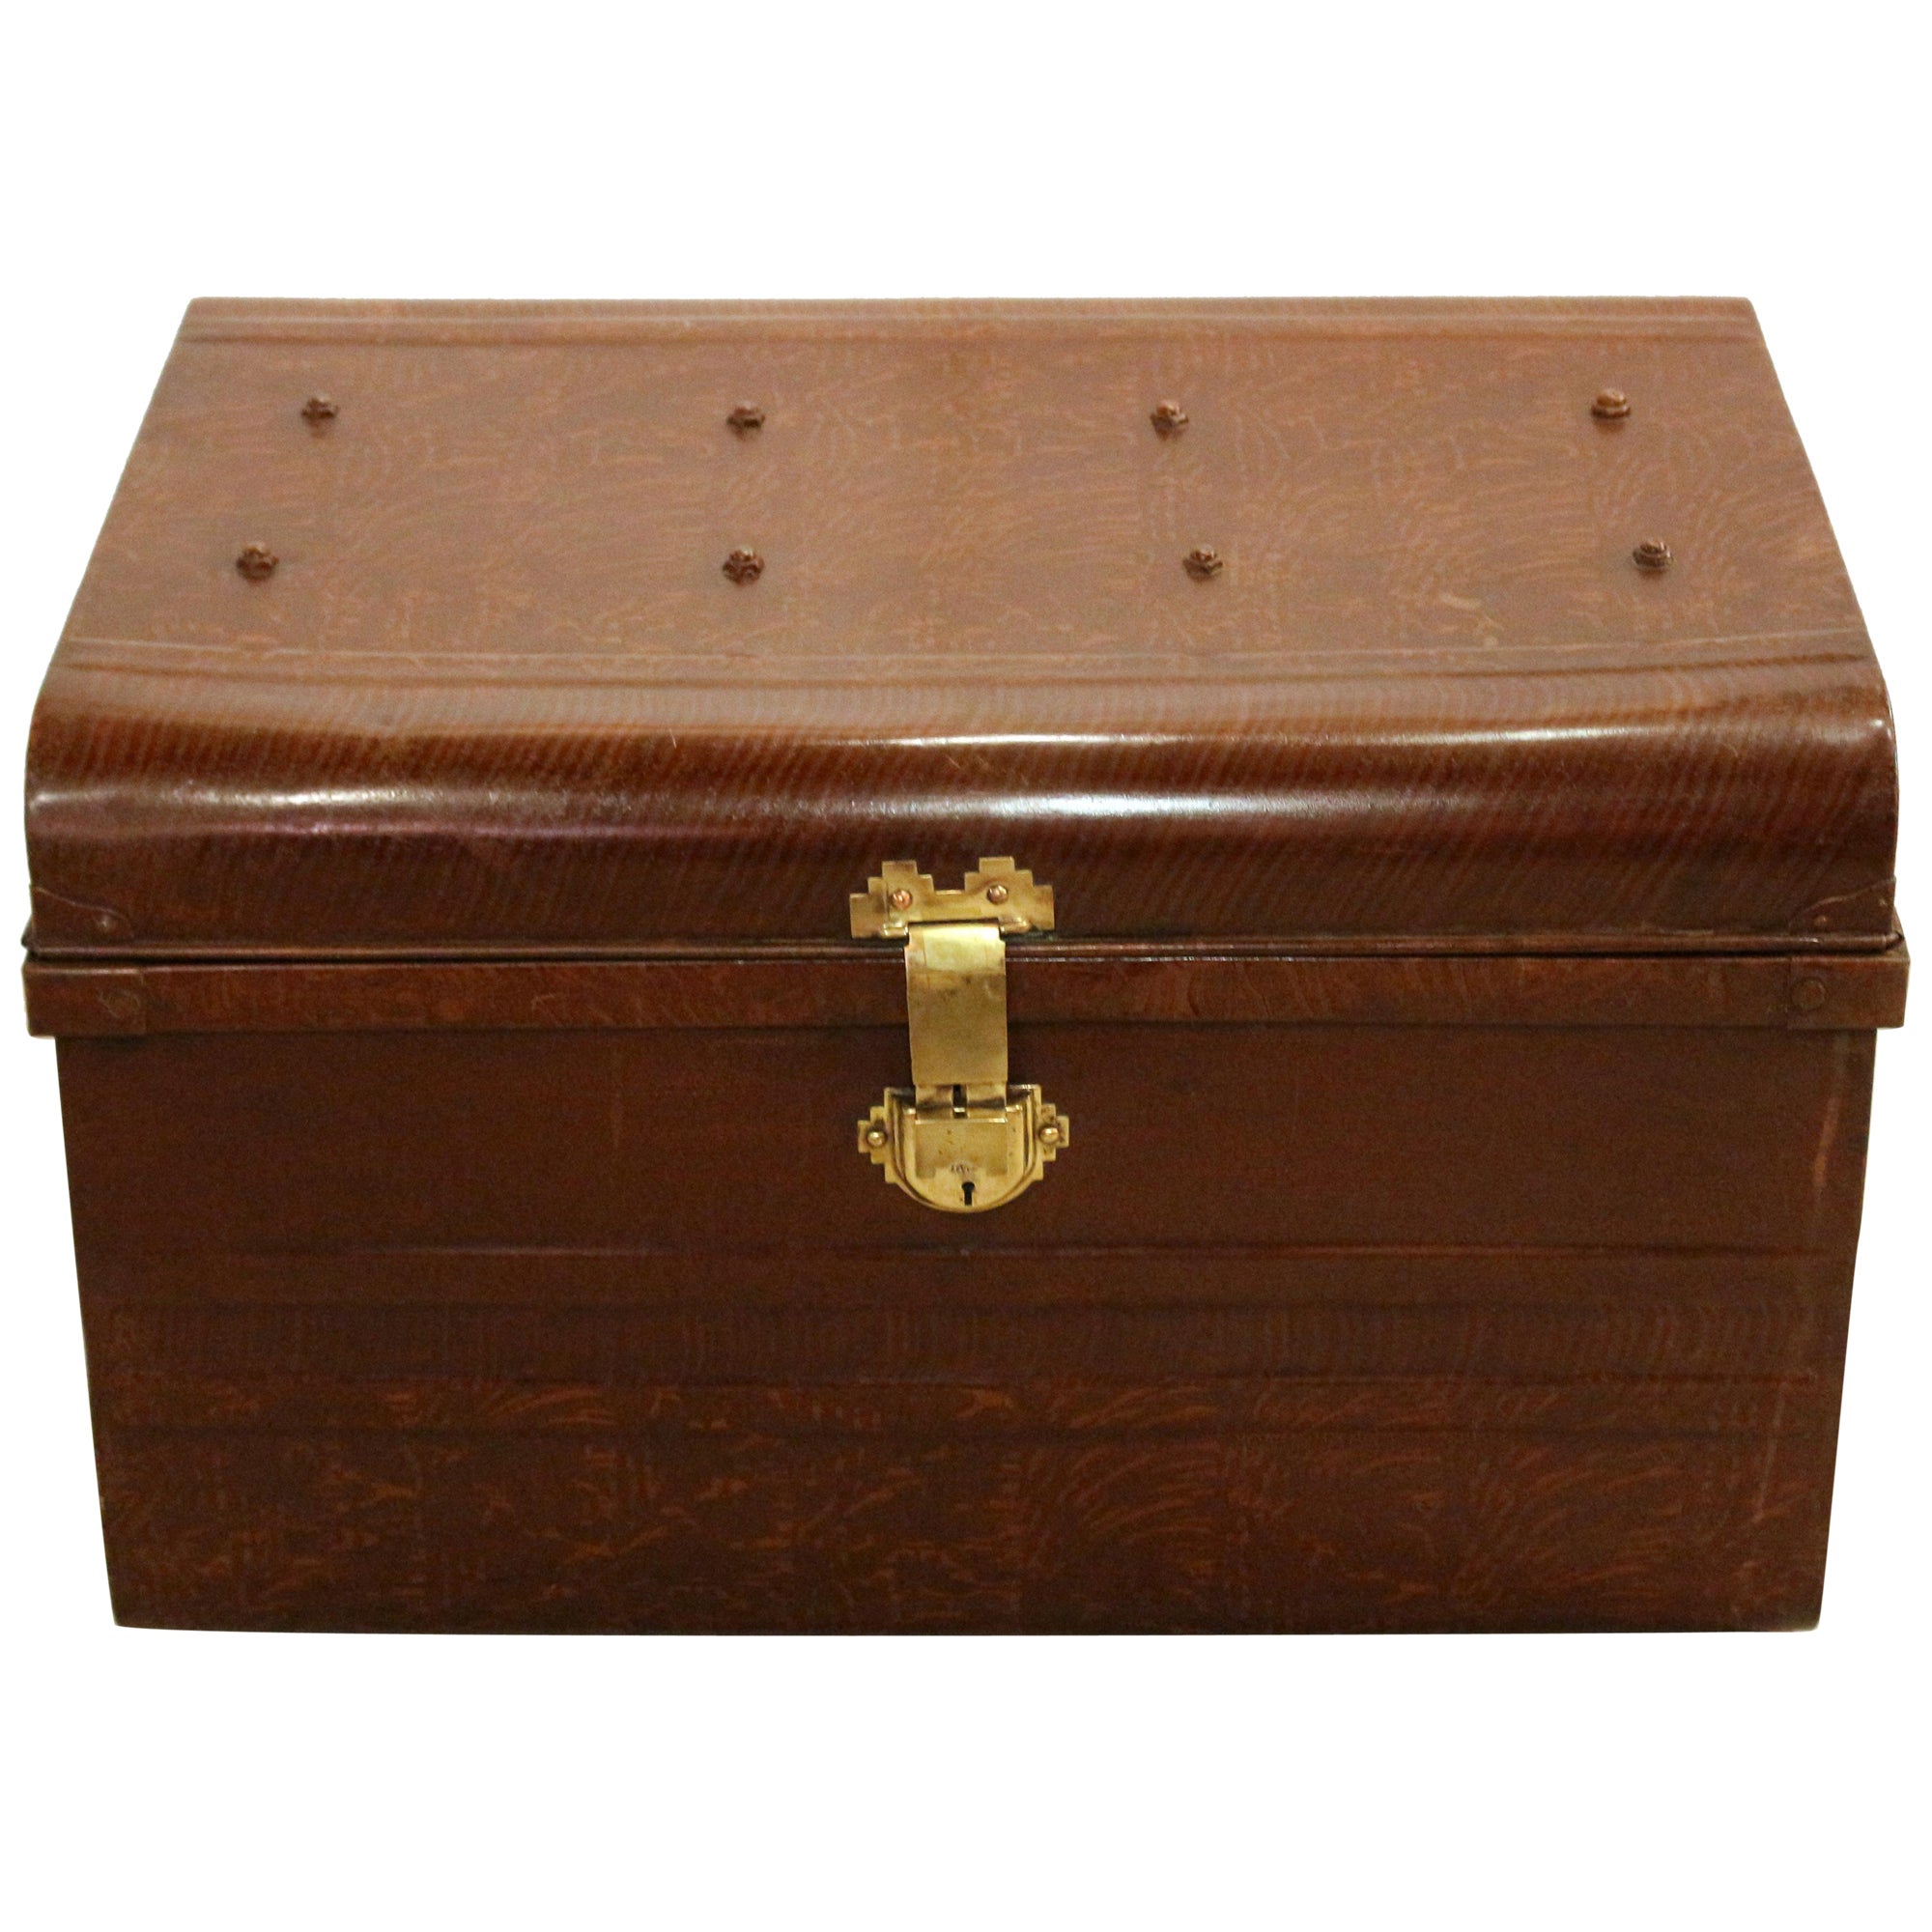 Late 19th-Early 20th Century Steel Trunk